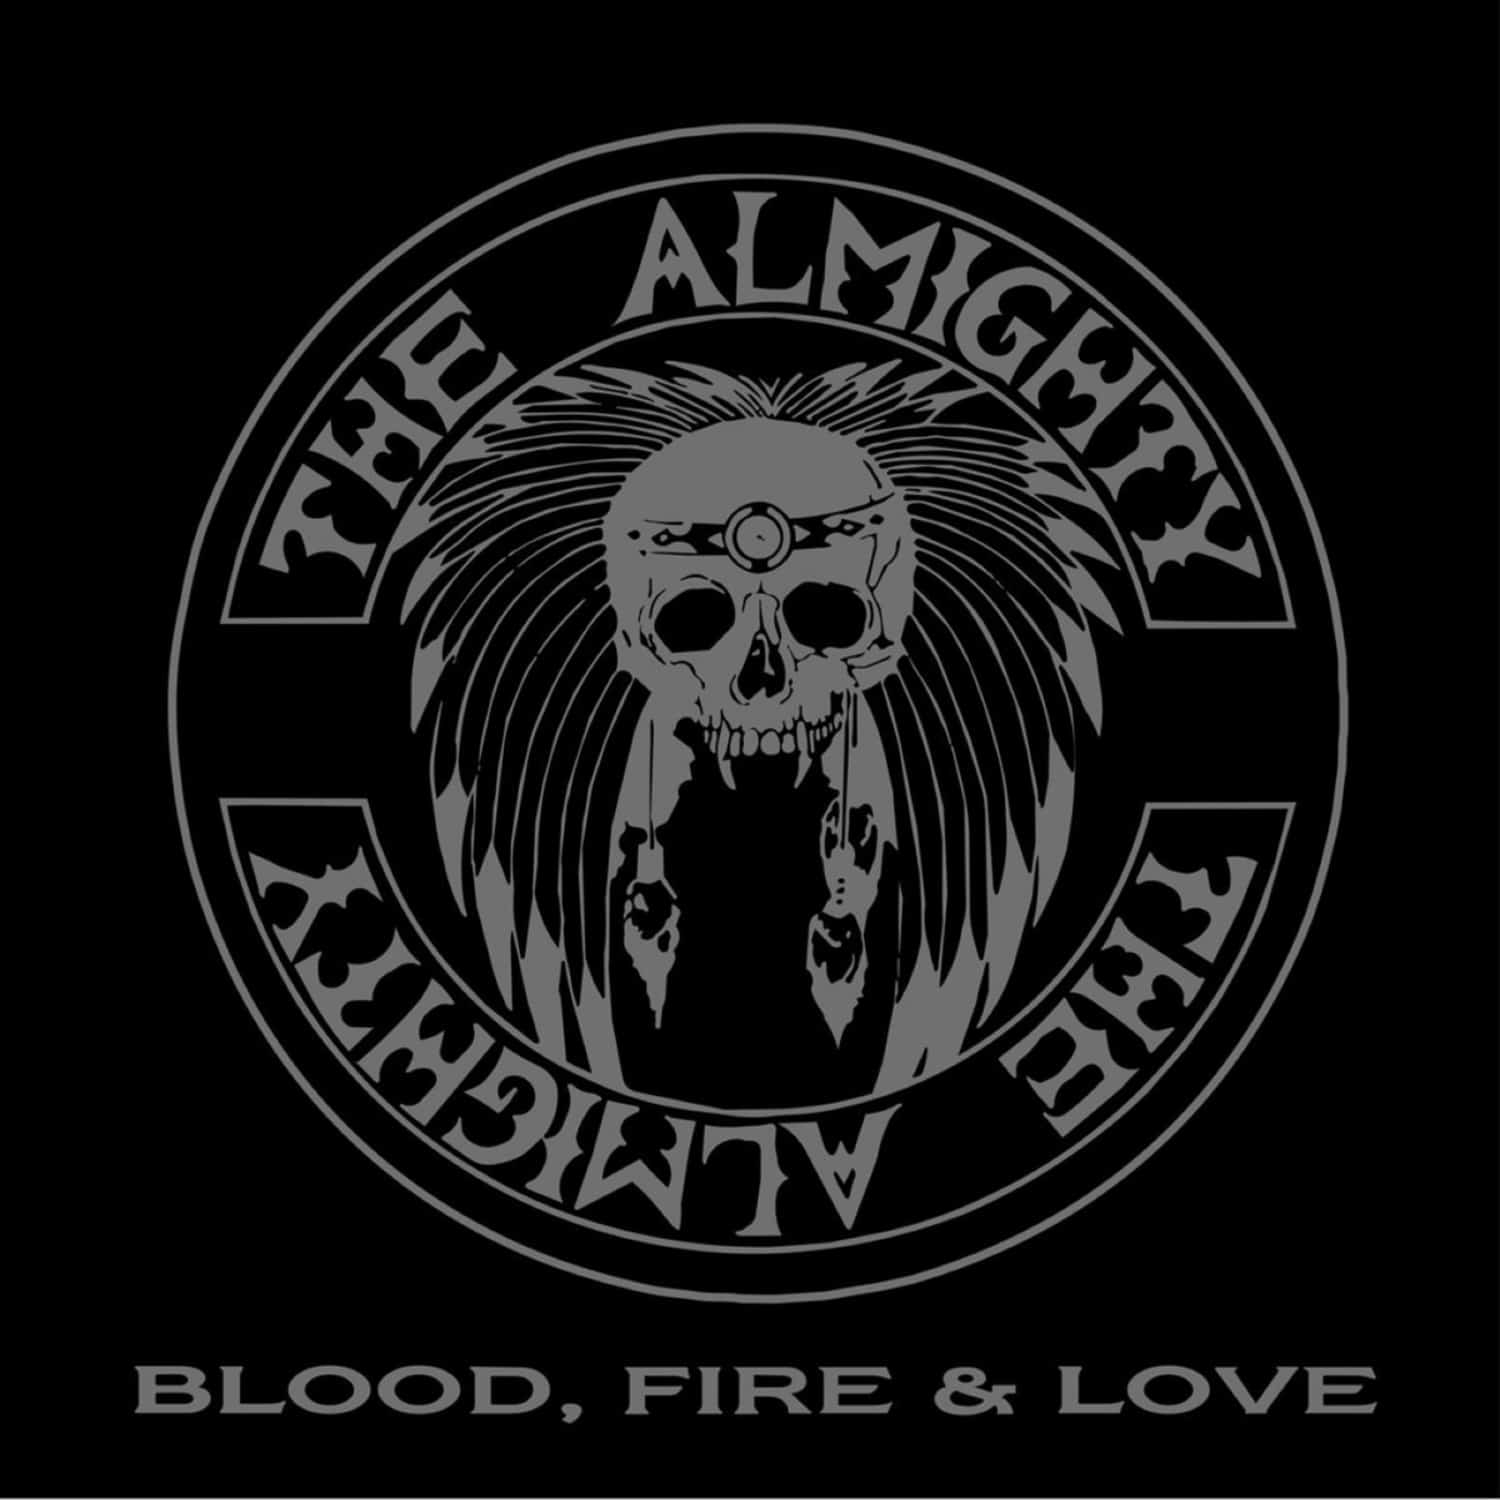 The Almighty - BLOOD, FIRE & LOVE 